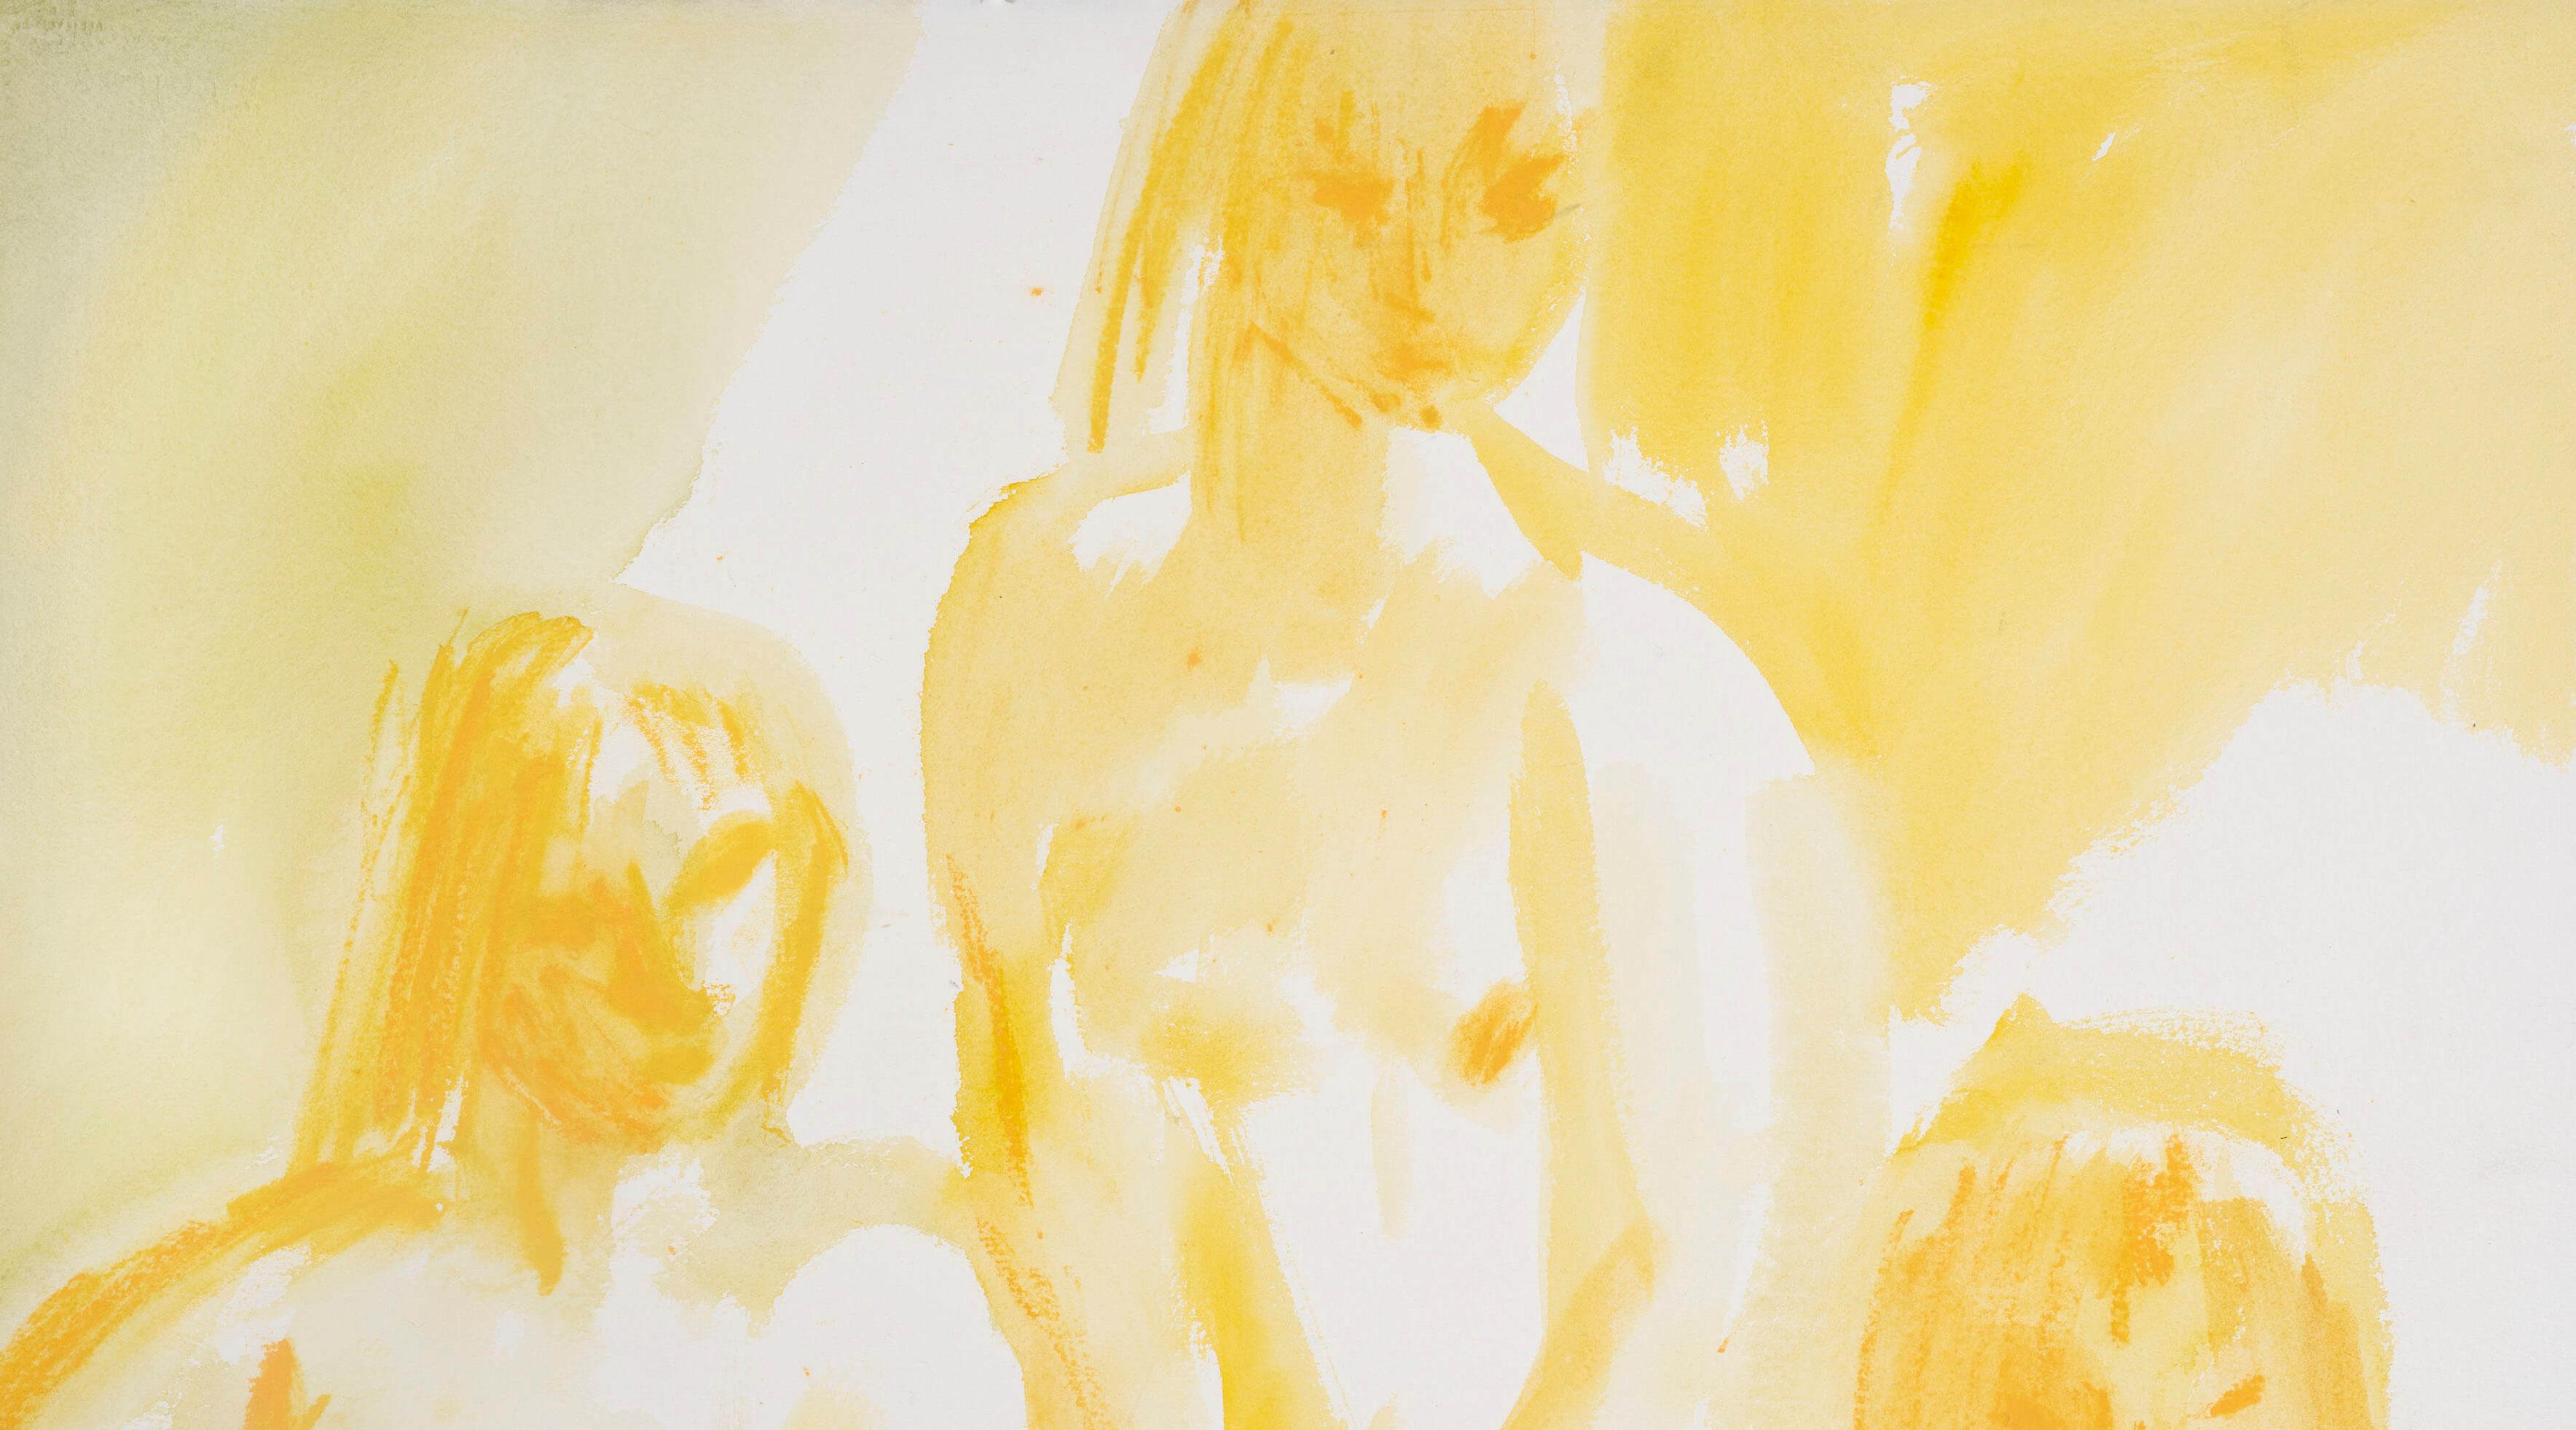 Three nude figures rendered in pale yellow